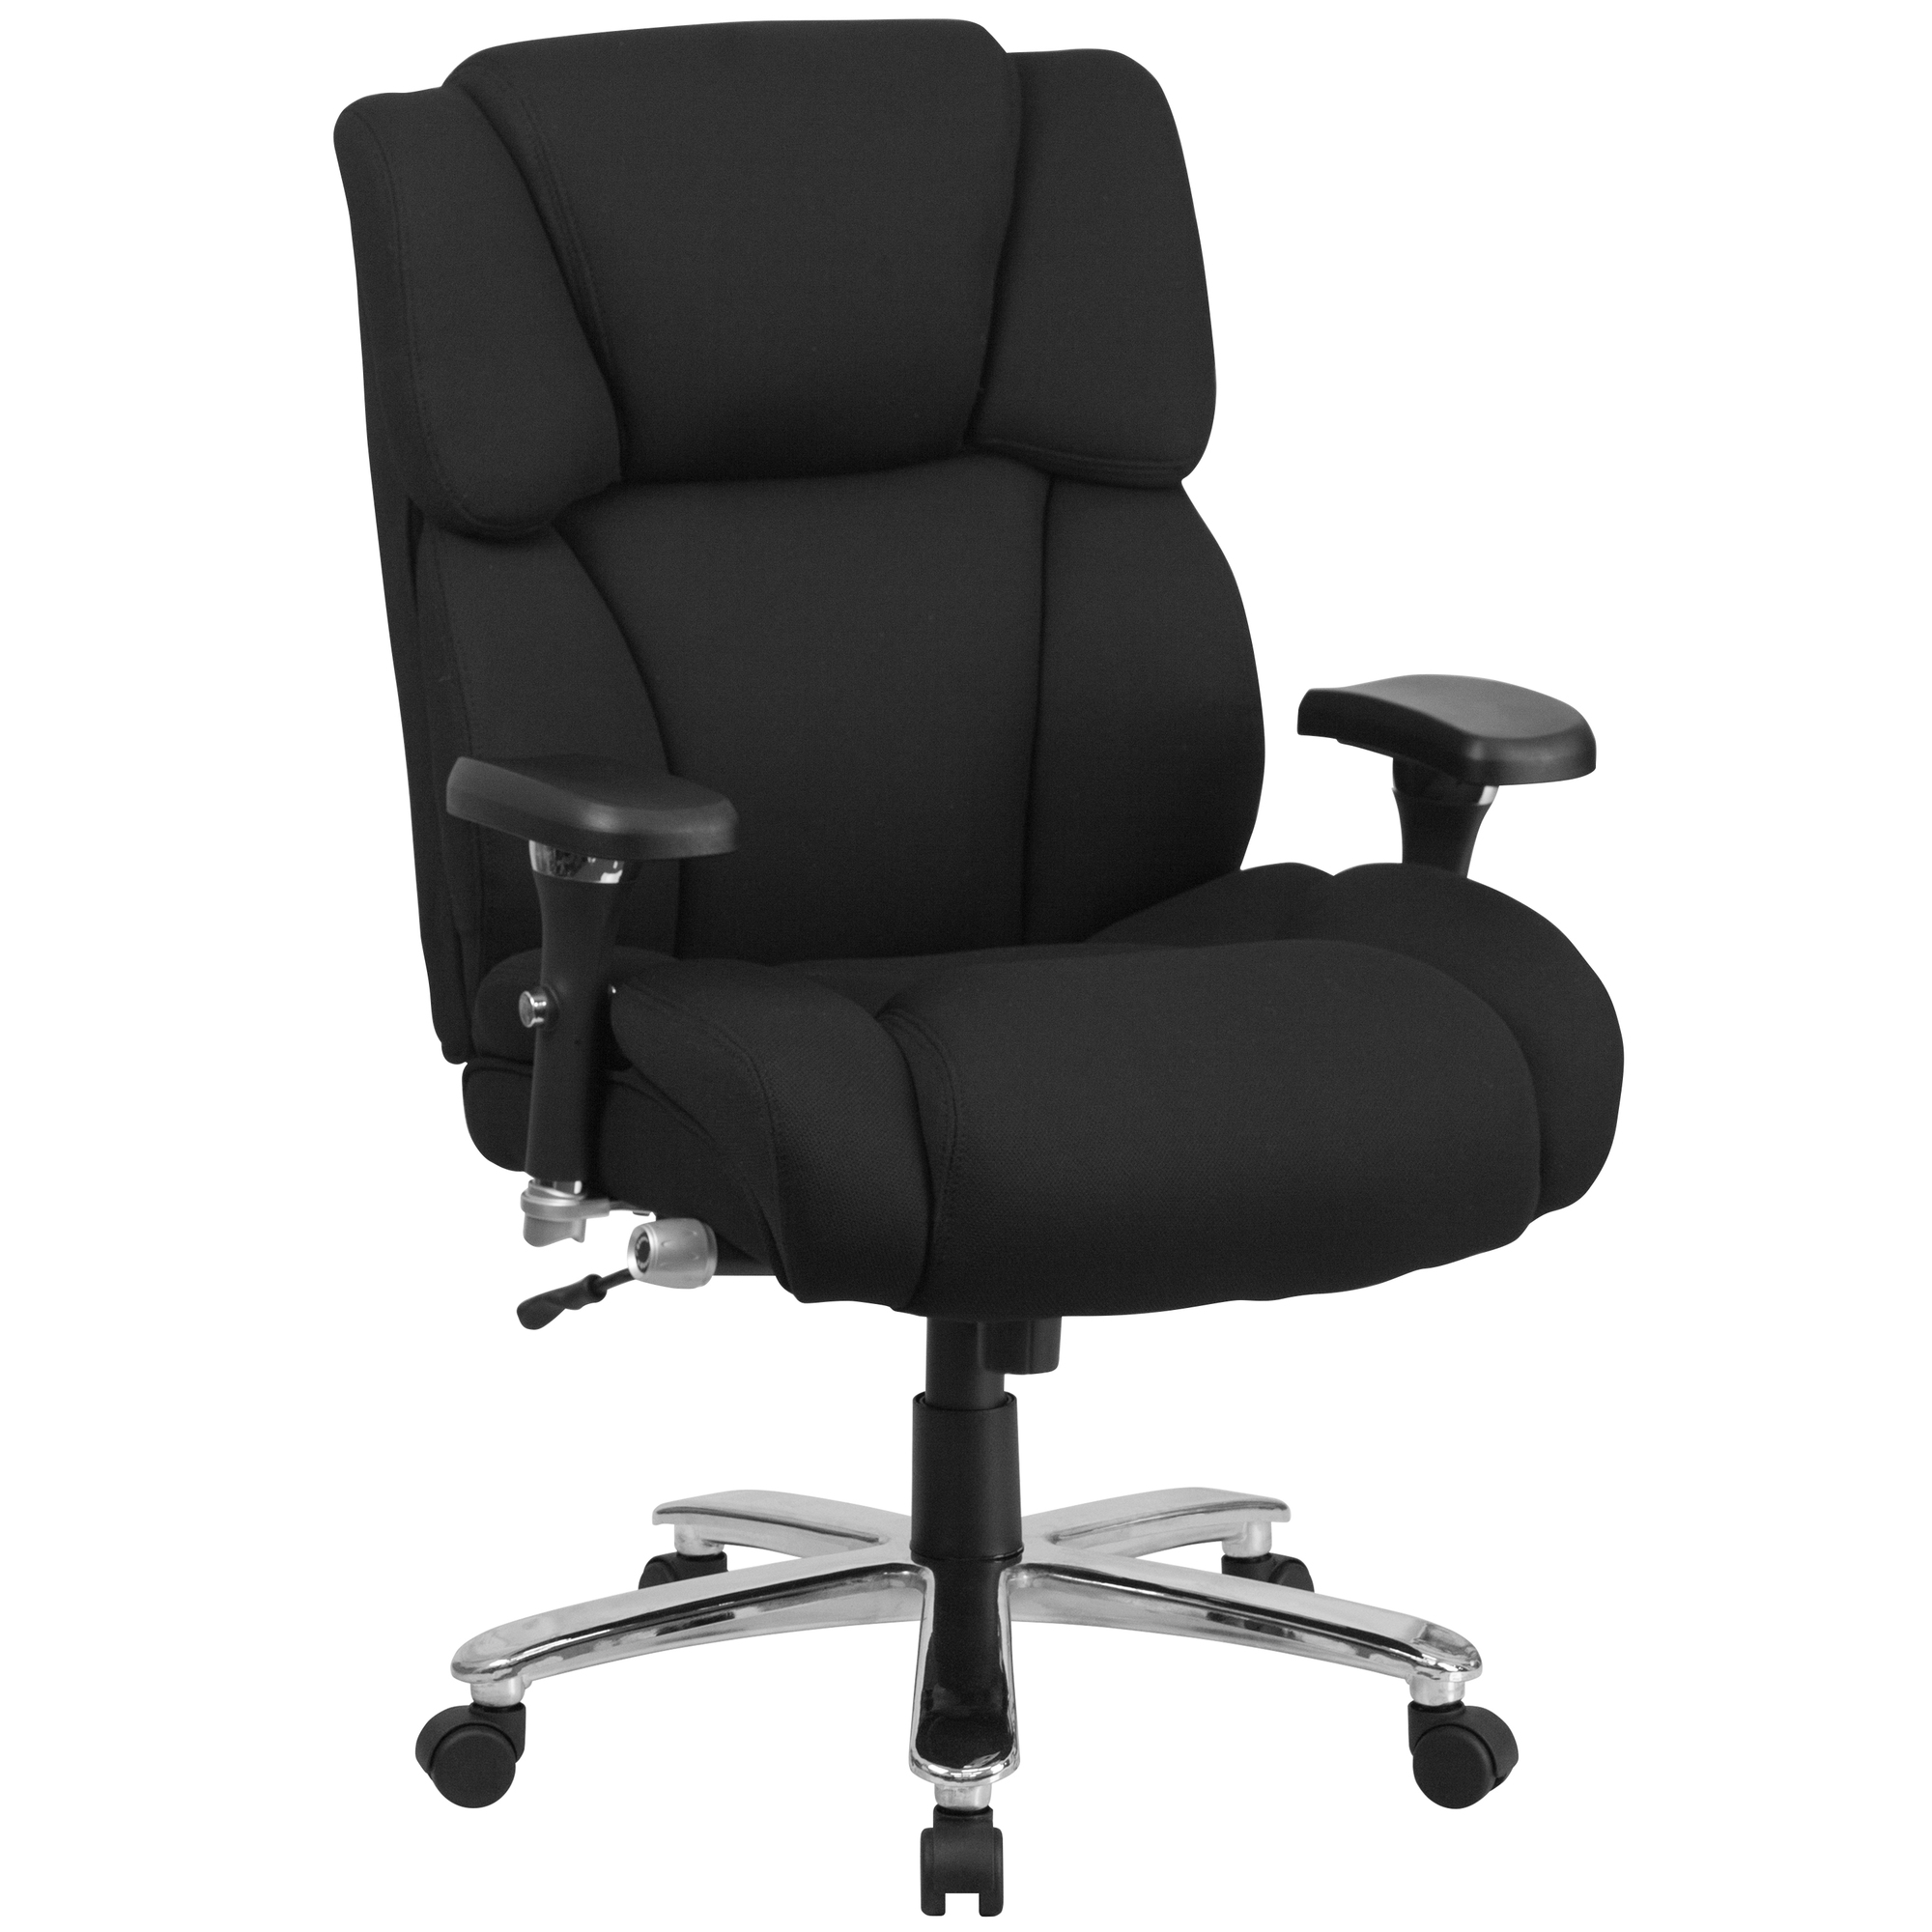 400 lb. Rated High Back Black Fabric Chair, Primary Color Black, Included (qty.) 1, Model - Flash Furniture GO2149